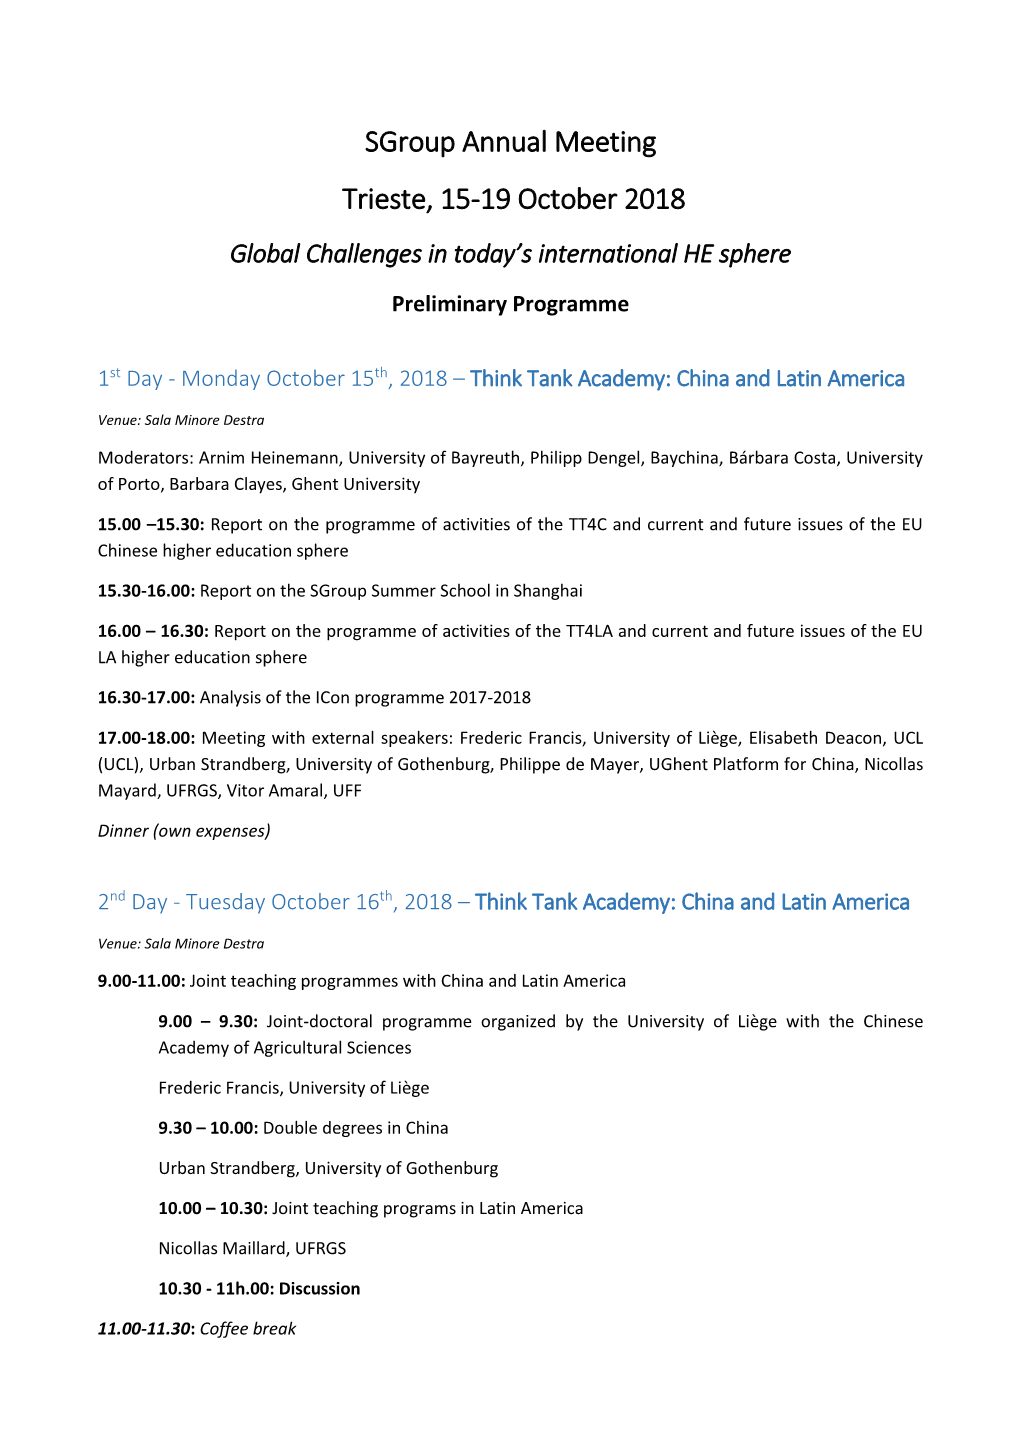 Sgroup Annual Meeting Trieste, 15-19 October 2018 Global Challenges in Today’S International HE Sphere Preliminary Programme